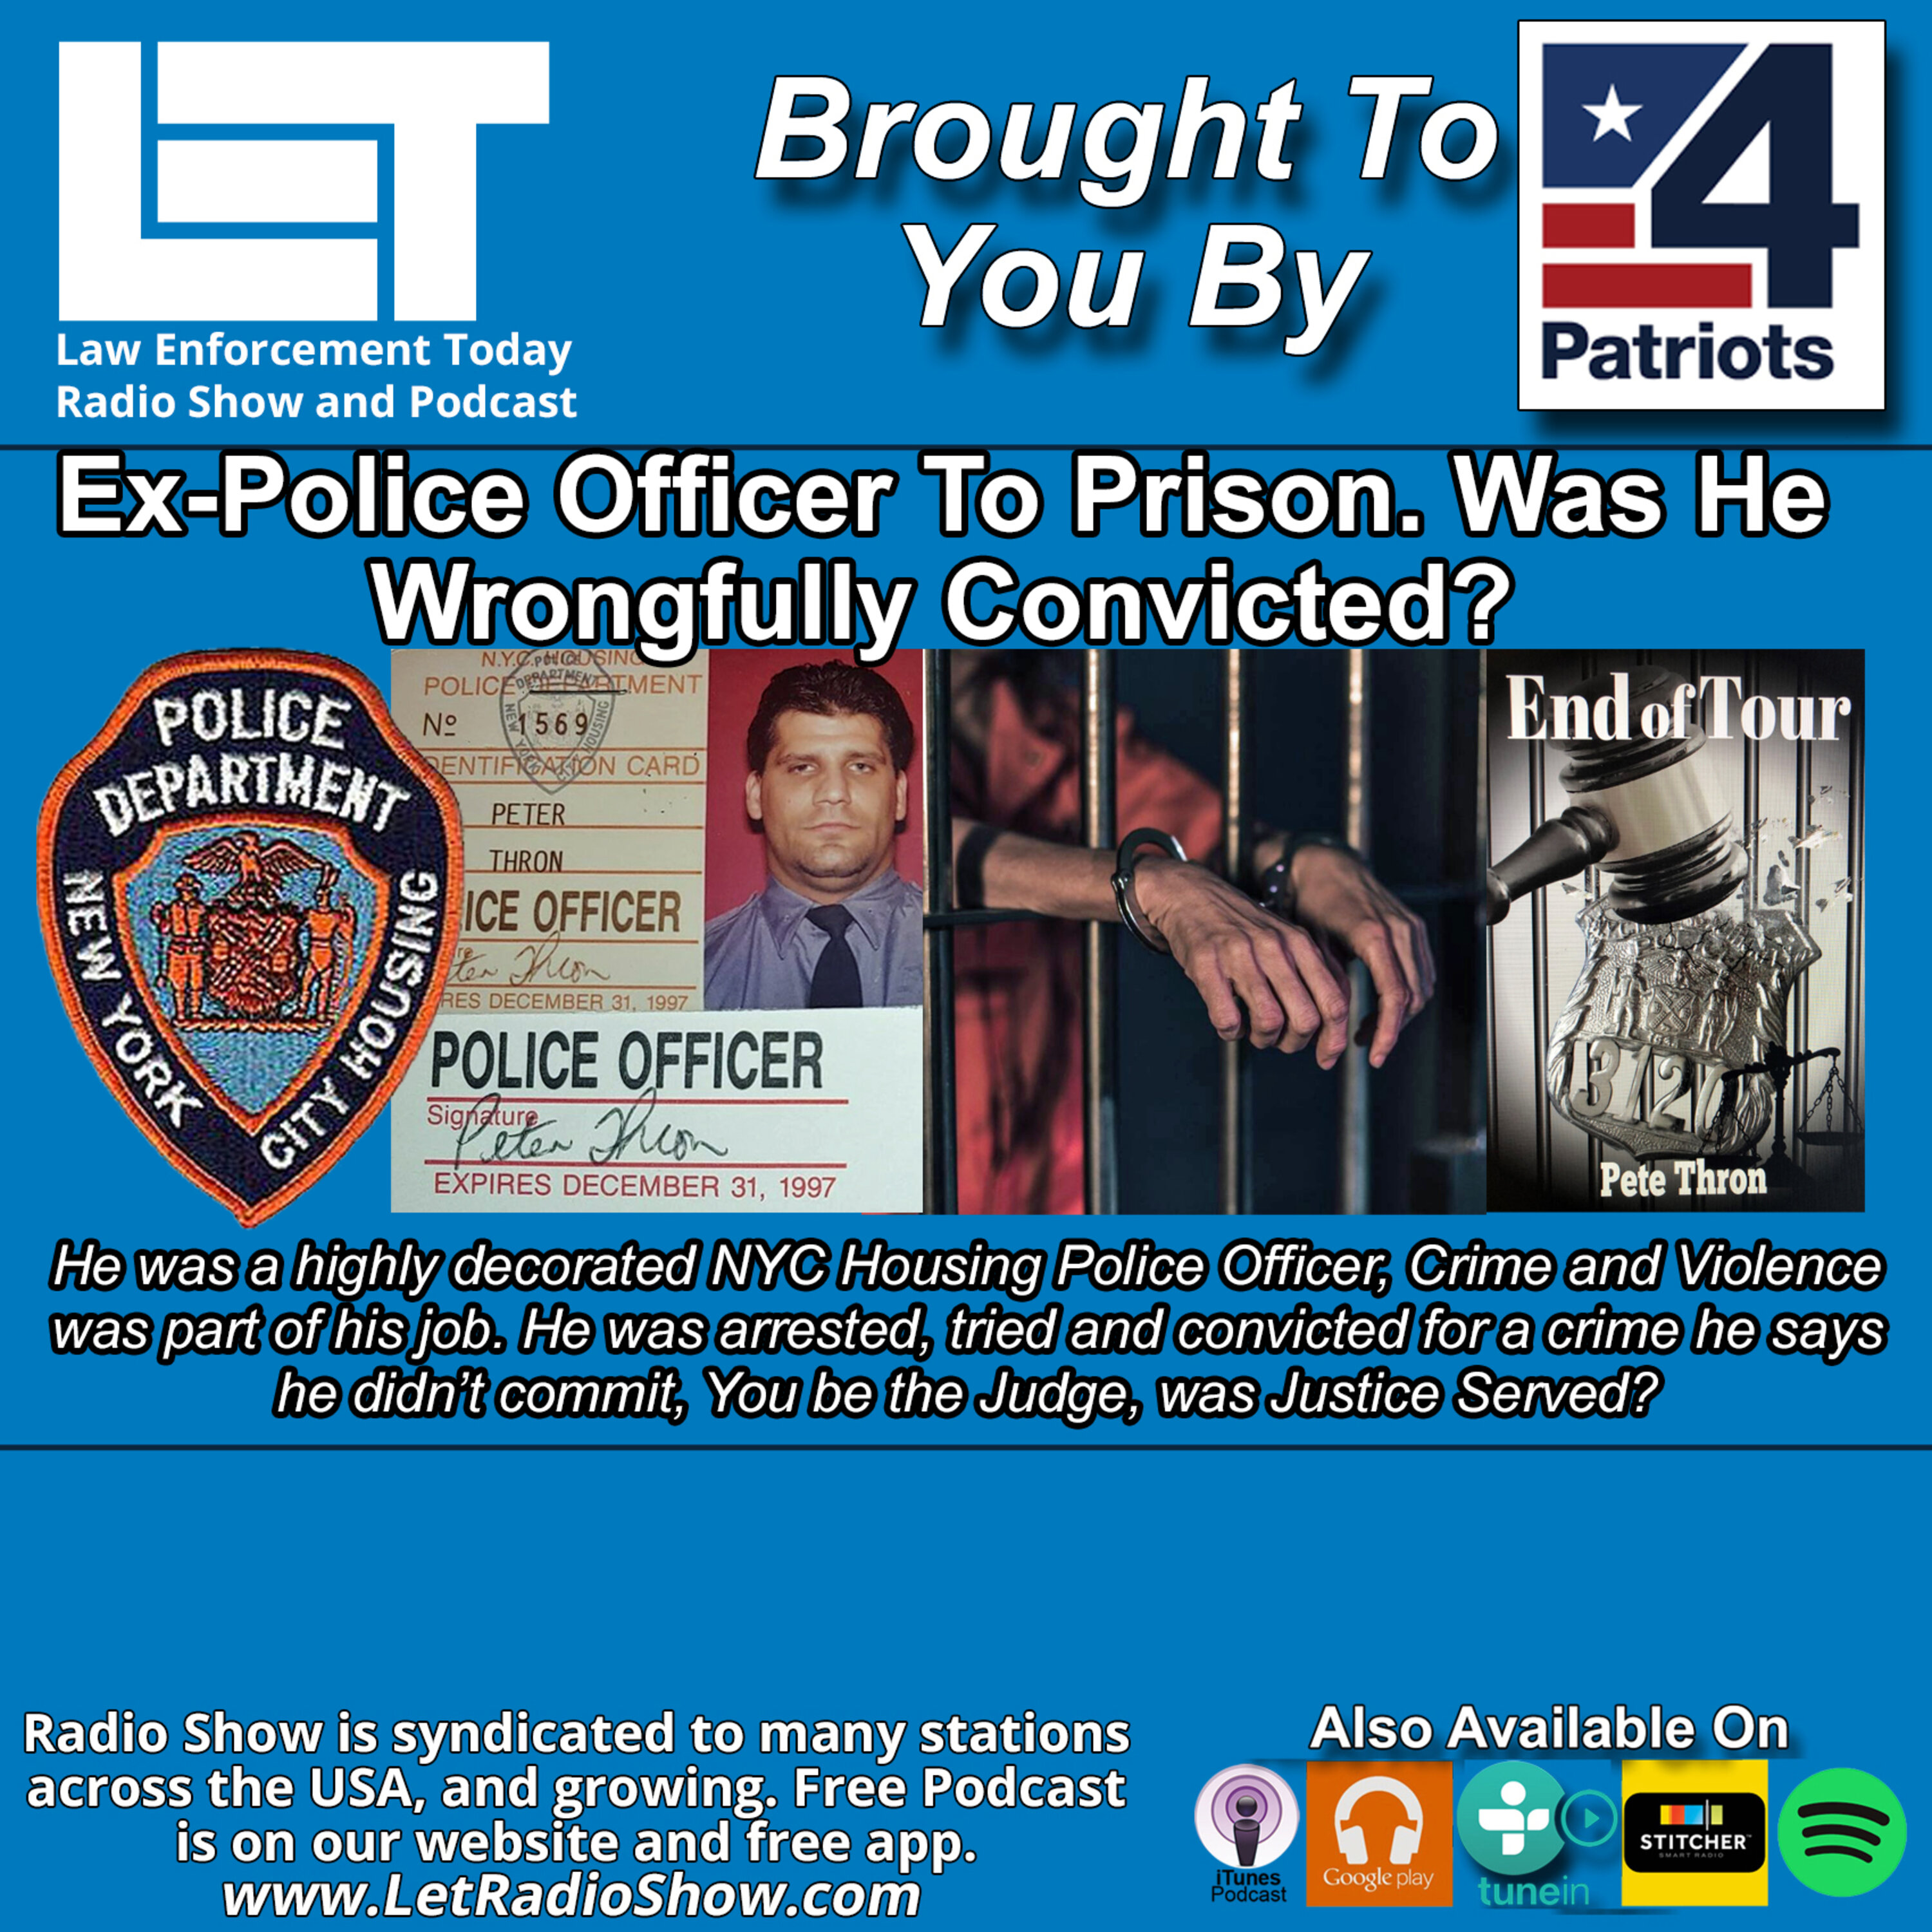 Was He Wrongfully Convicted? Police Officer To Prison.